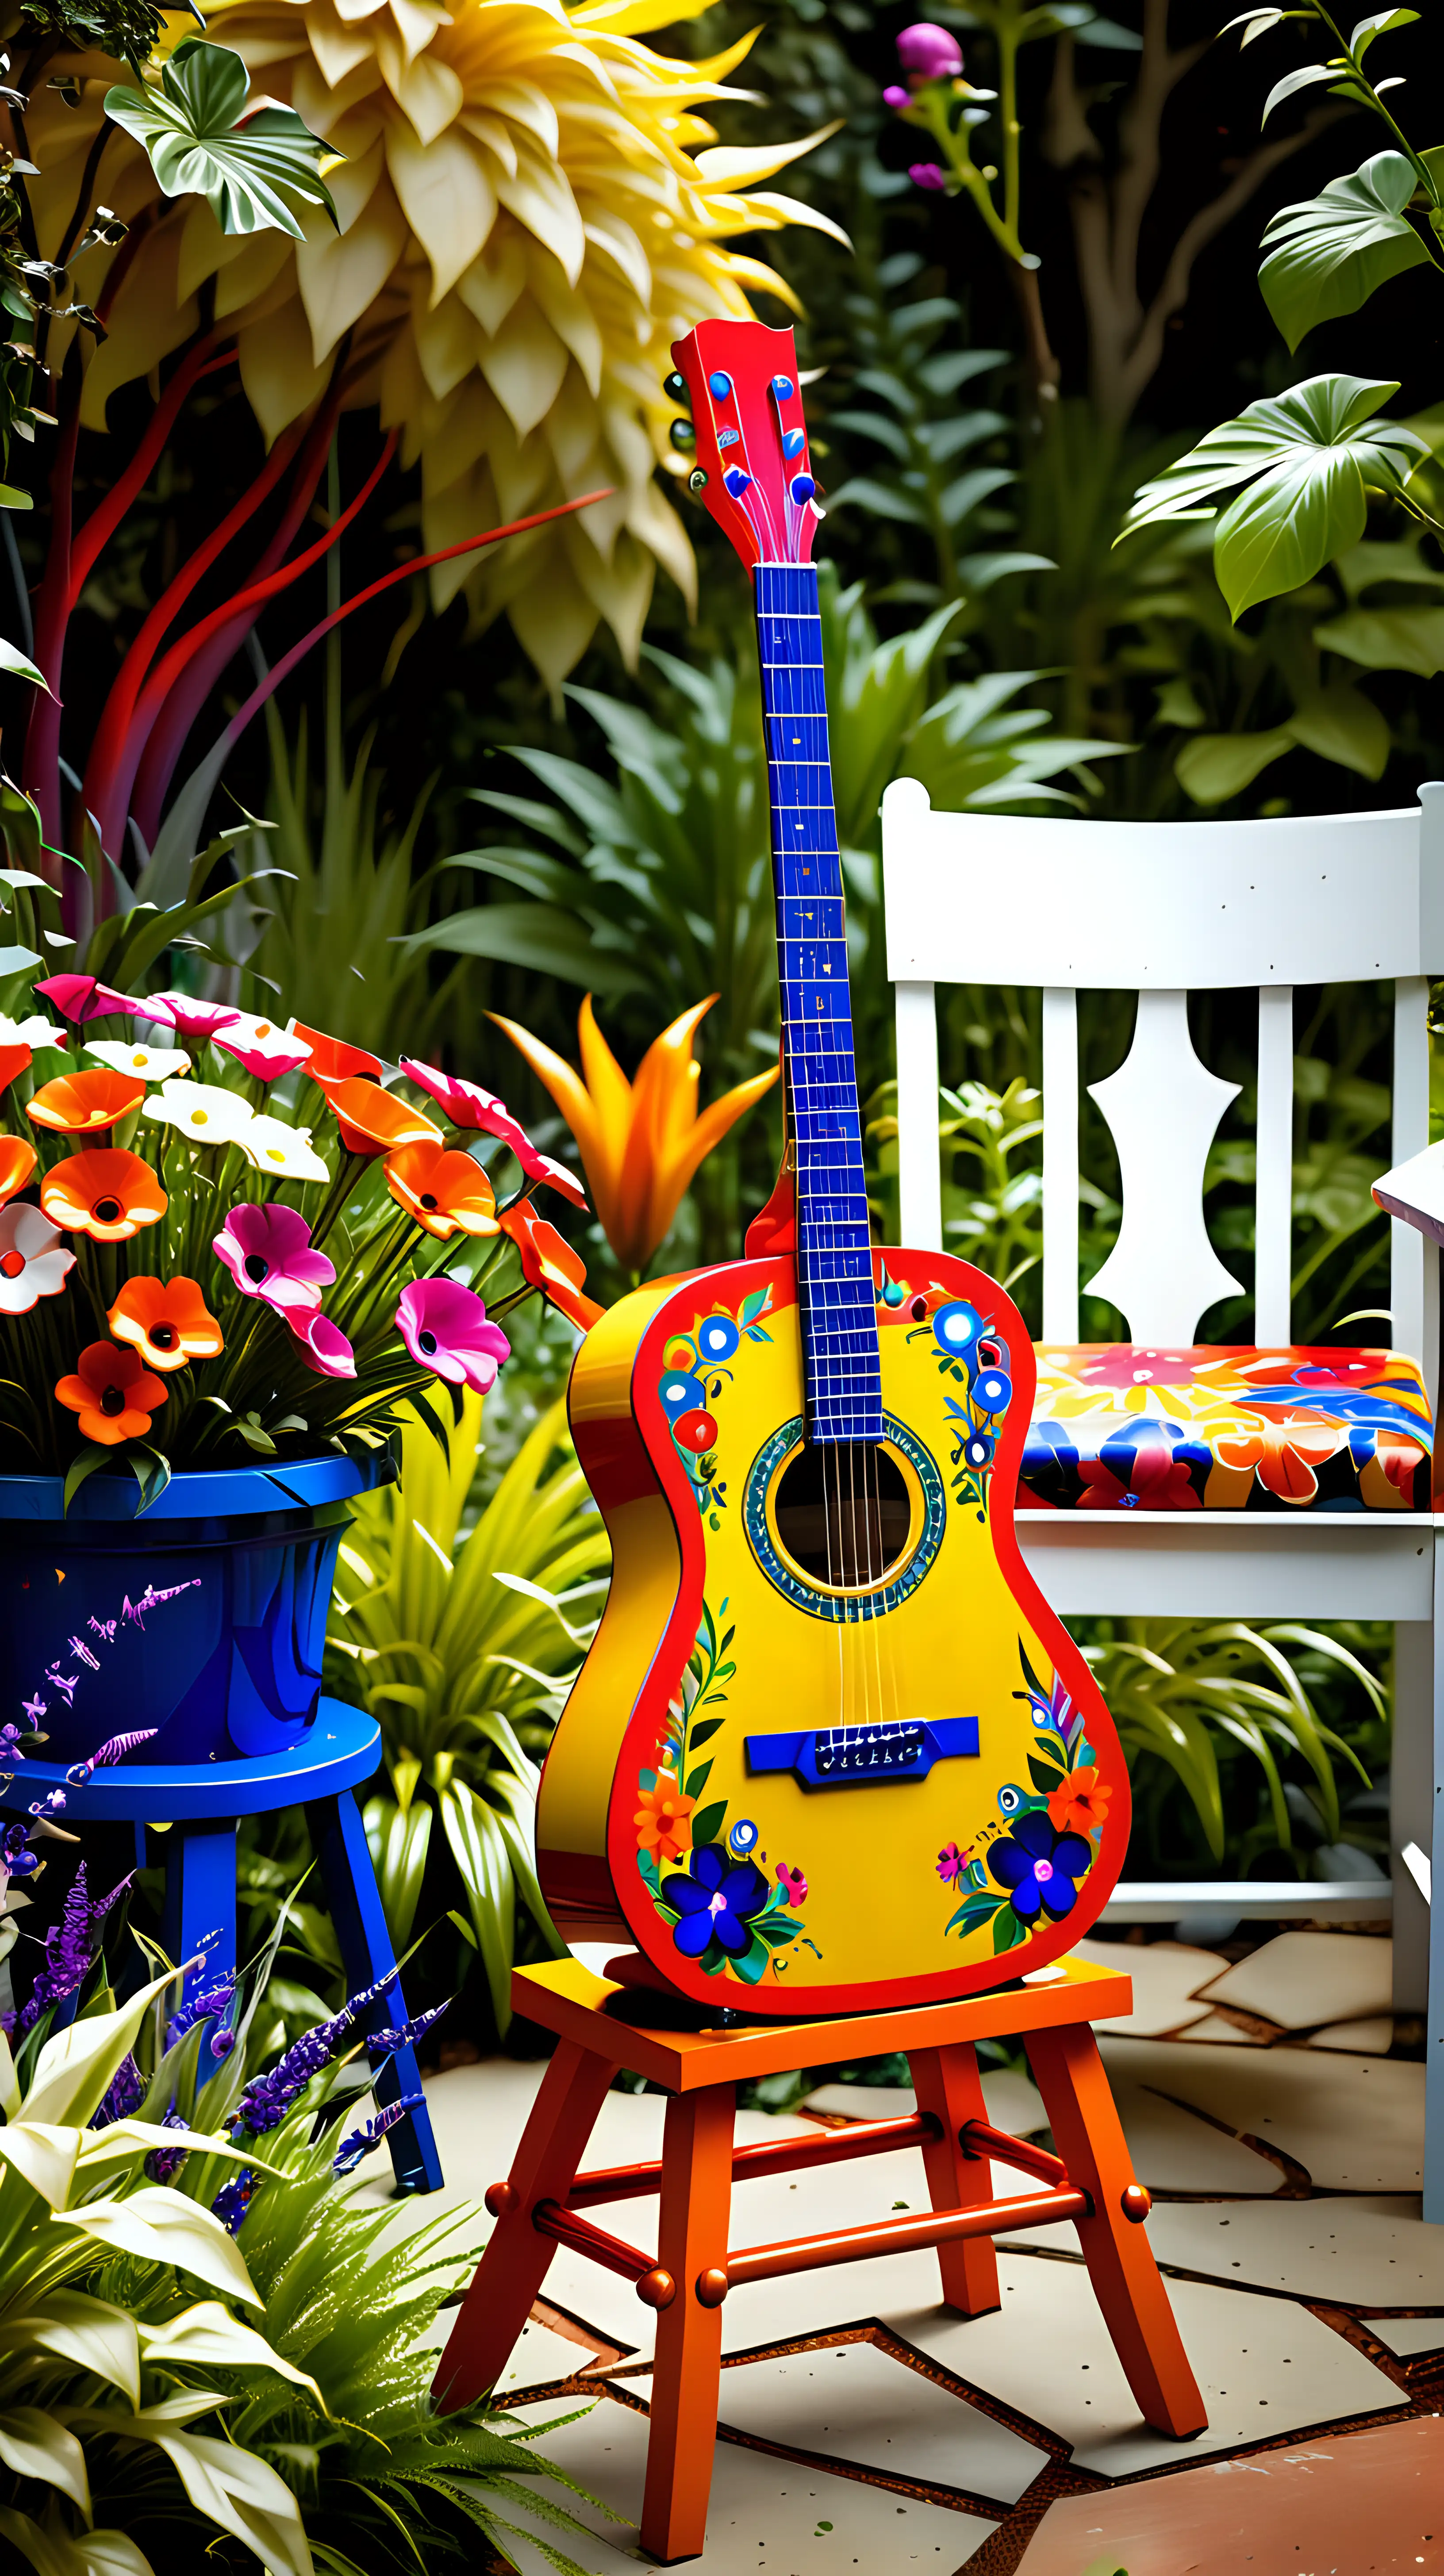 /imagine prompt: A flamboyant, brightly colored guitar propped up on a quirky, artistically designed stool, standing upright in a vibrant garden. The surrounding flowers and greenery enhance the guitar's colors, with the outdoor light bringing the scene to life. Created Using: Bold colors, detailed floral background, artistic stool design, outdoor lighting, vivid style, natural setting, dynamic contrast --ar 1:1 --v 6.0